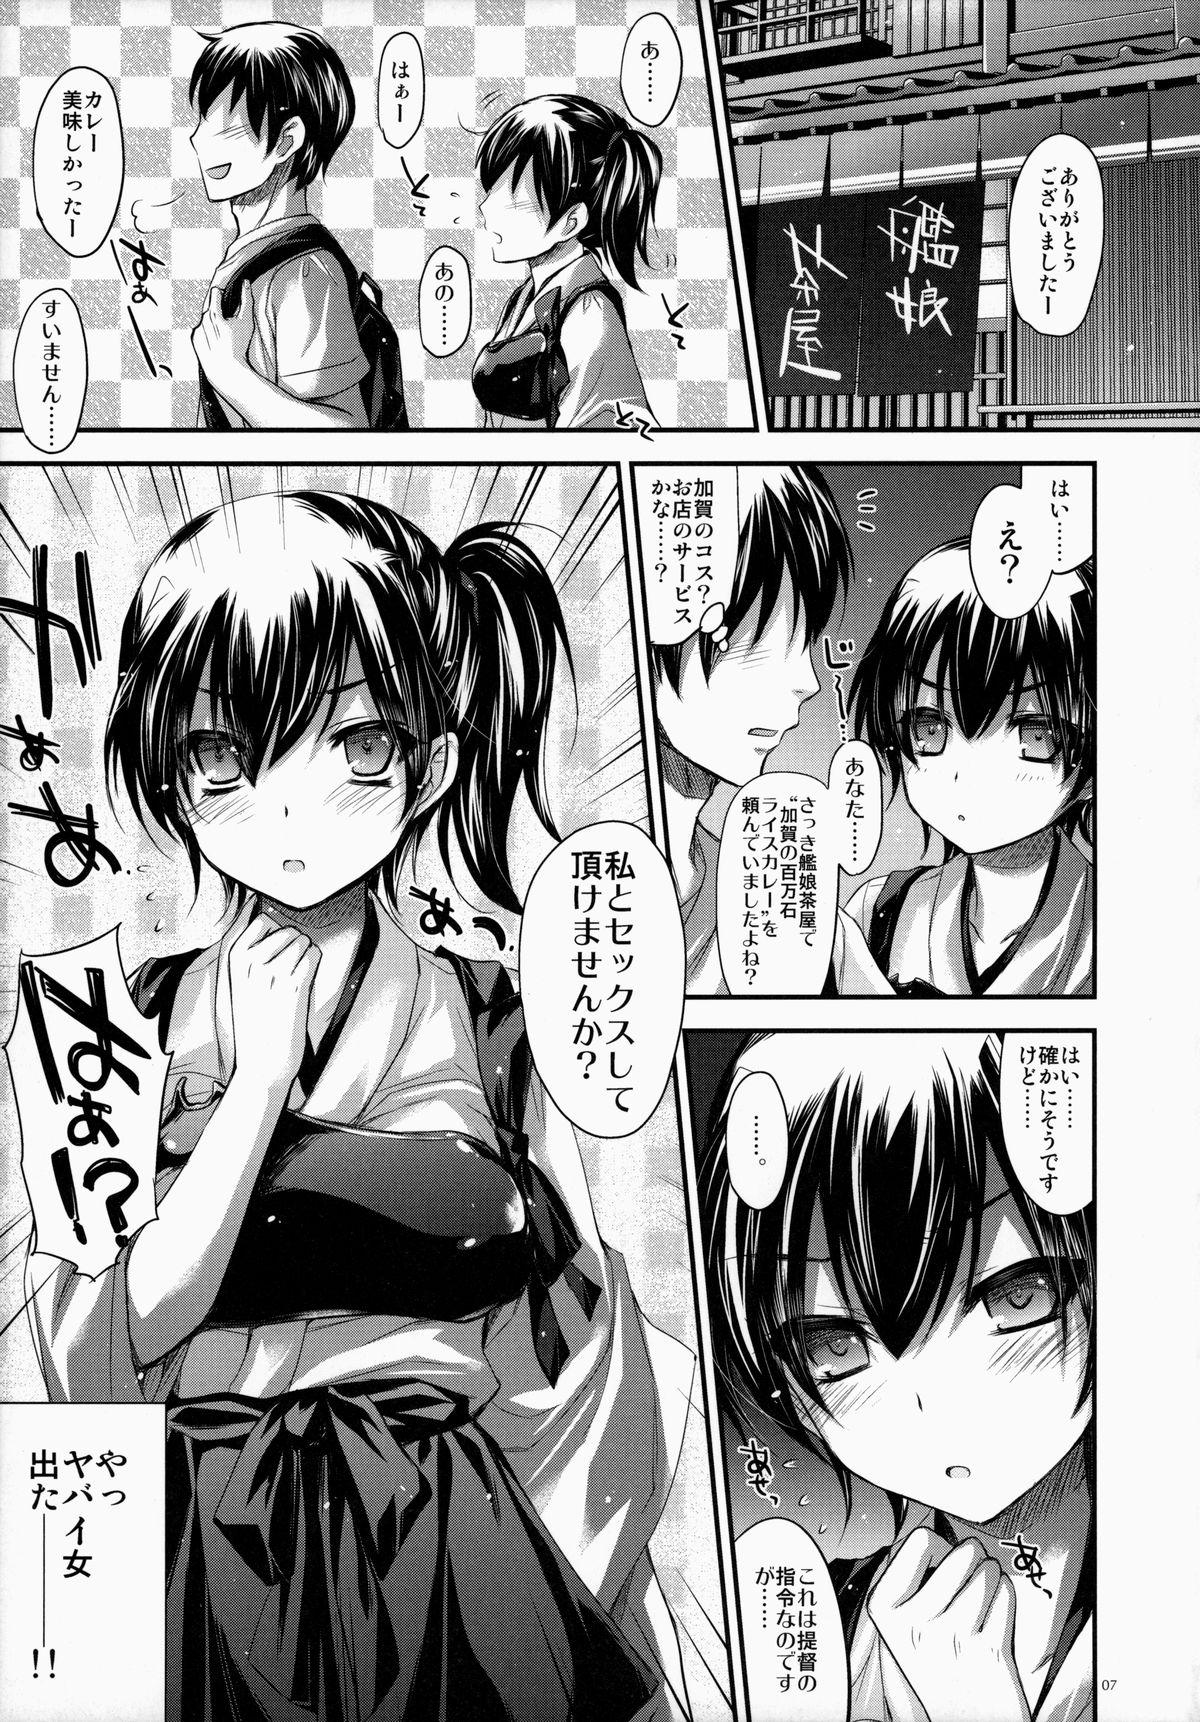 Fit GARIGARI 63 - Kantai collection Petite Teen - Page 7